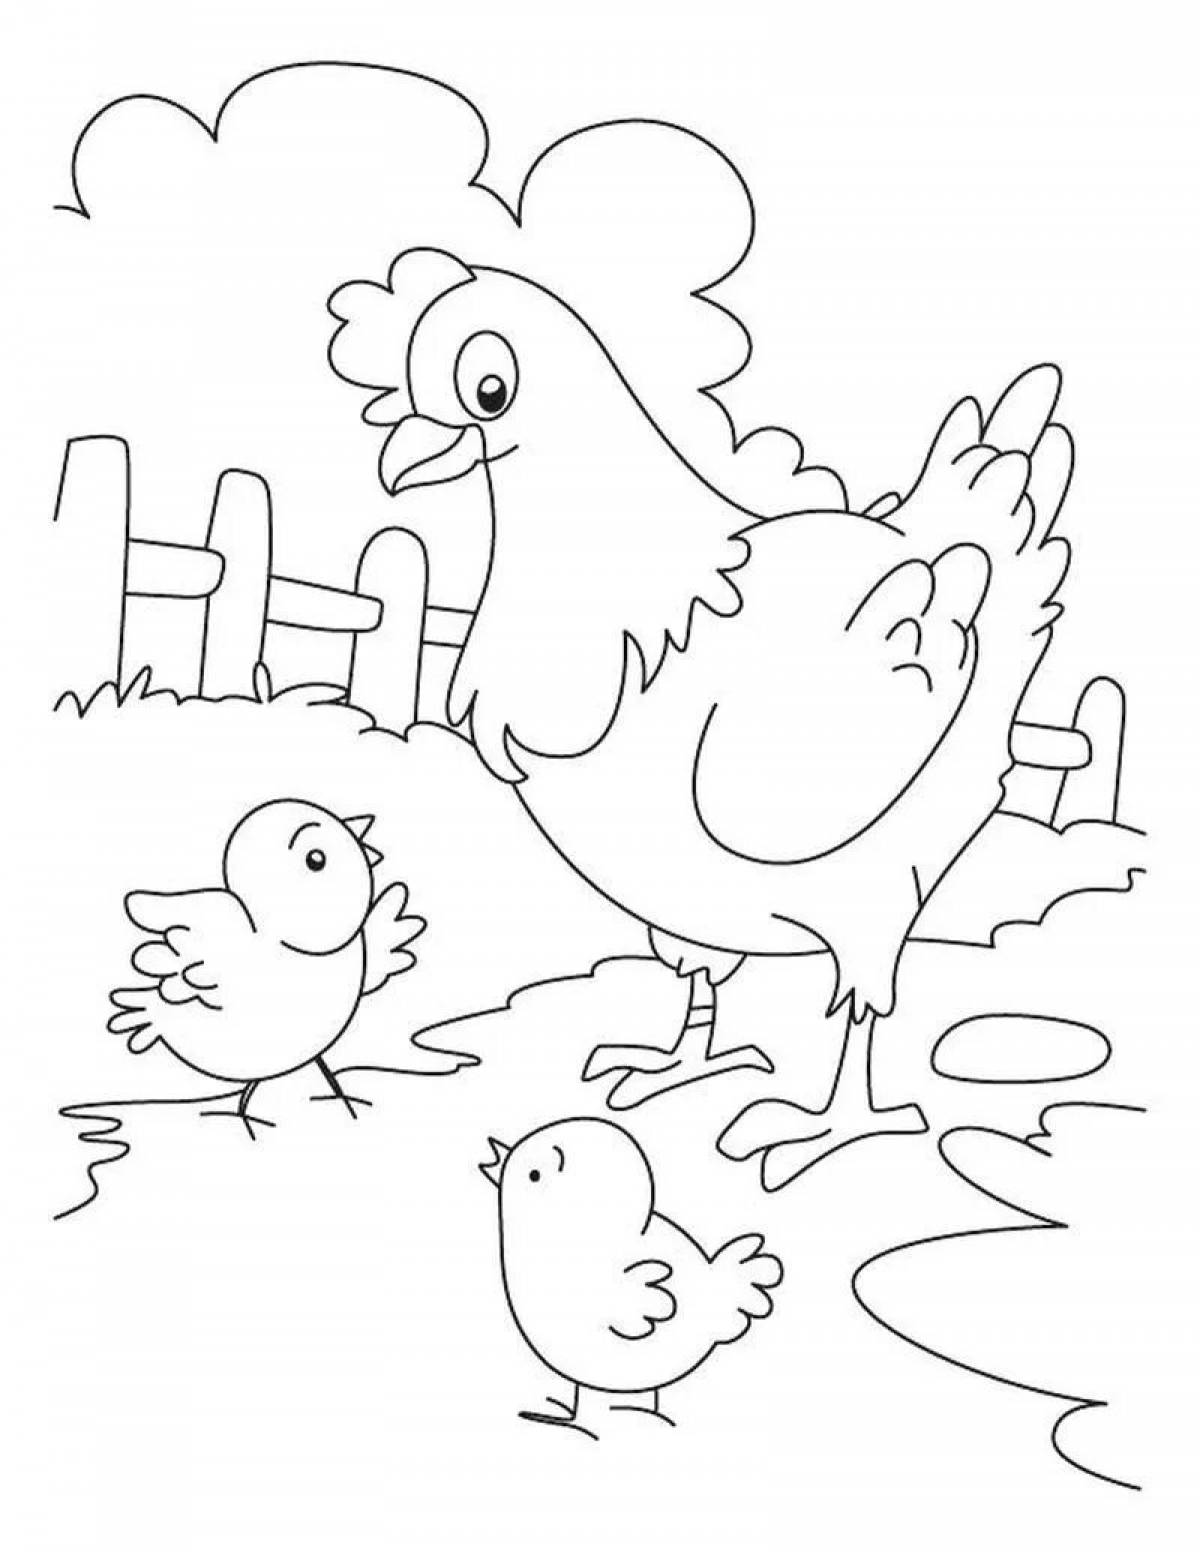 Glorious bird coloring pages for kids